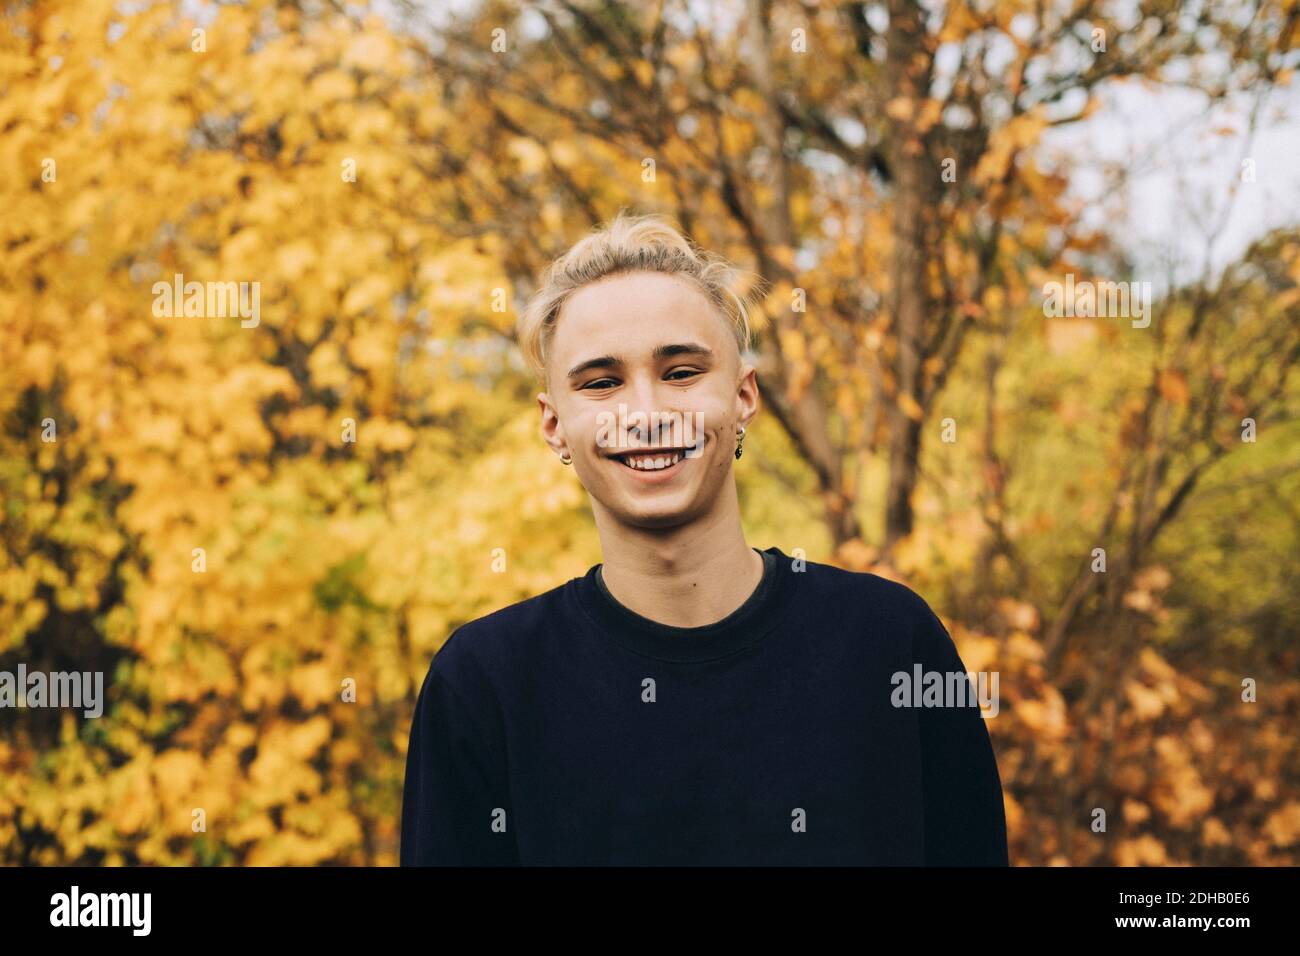 Portrait of smiling teenage boy with blond hair standing against maple trees Stock Photo